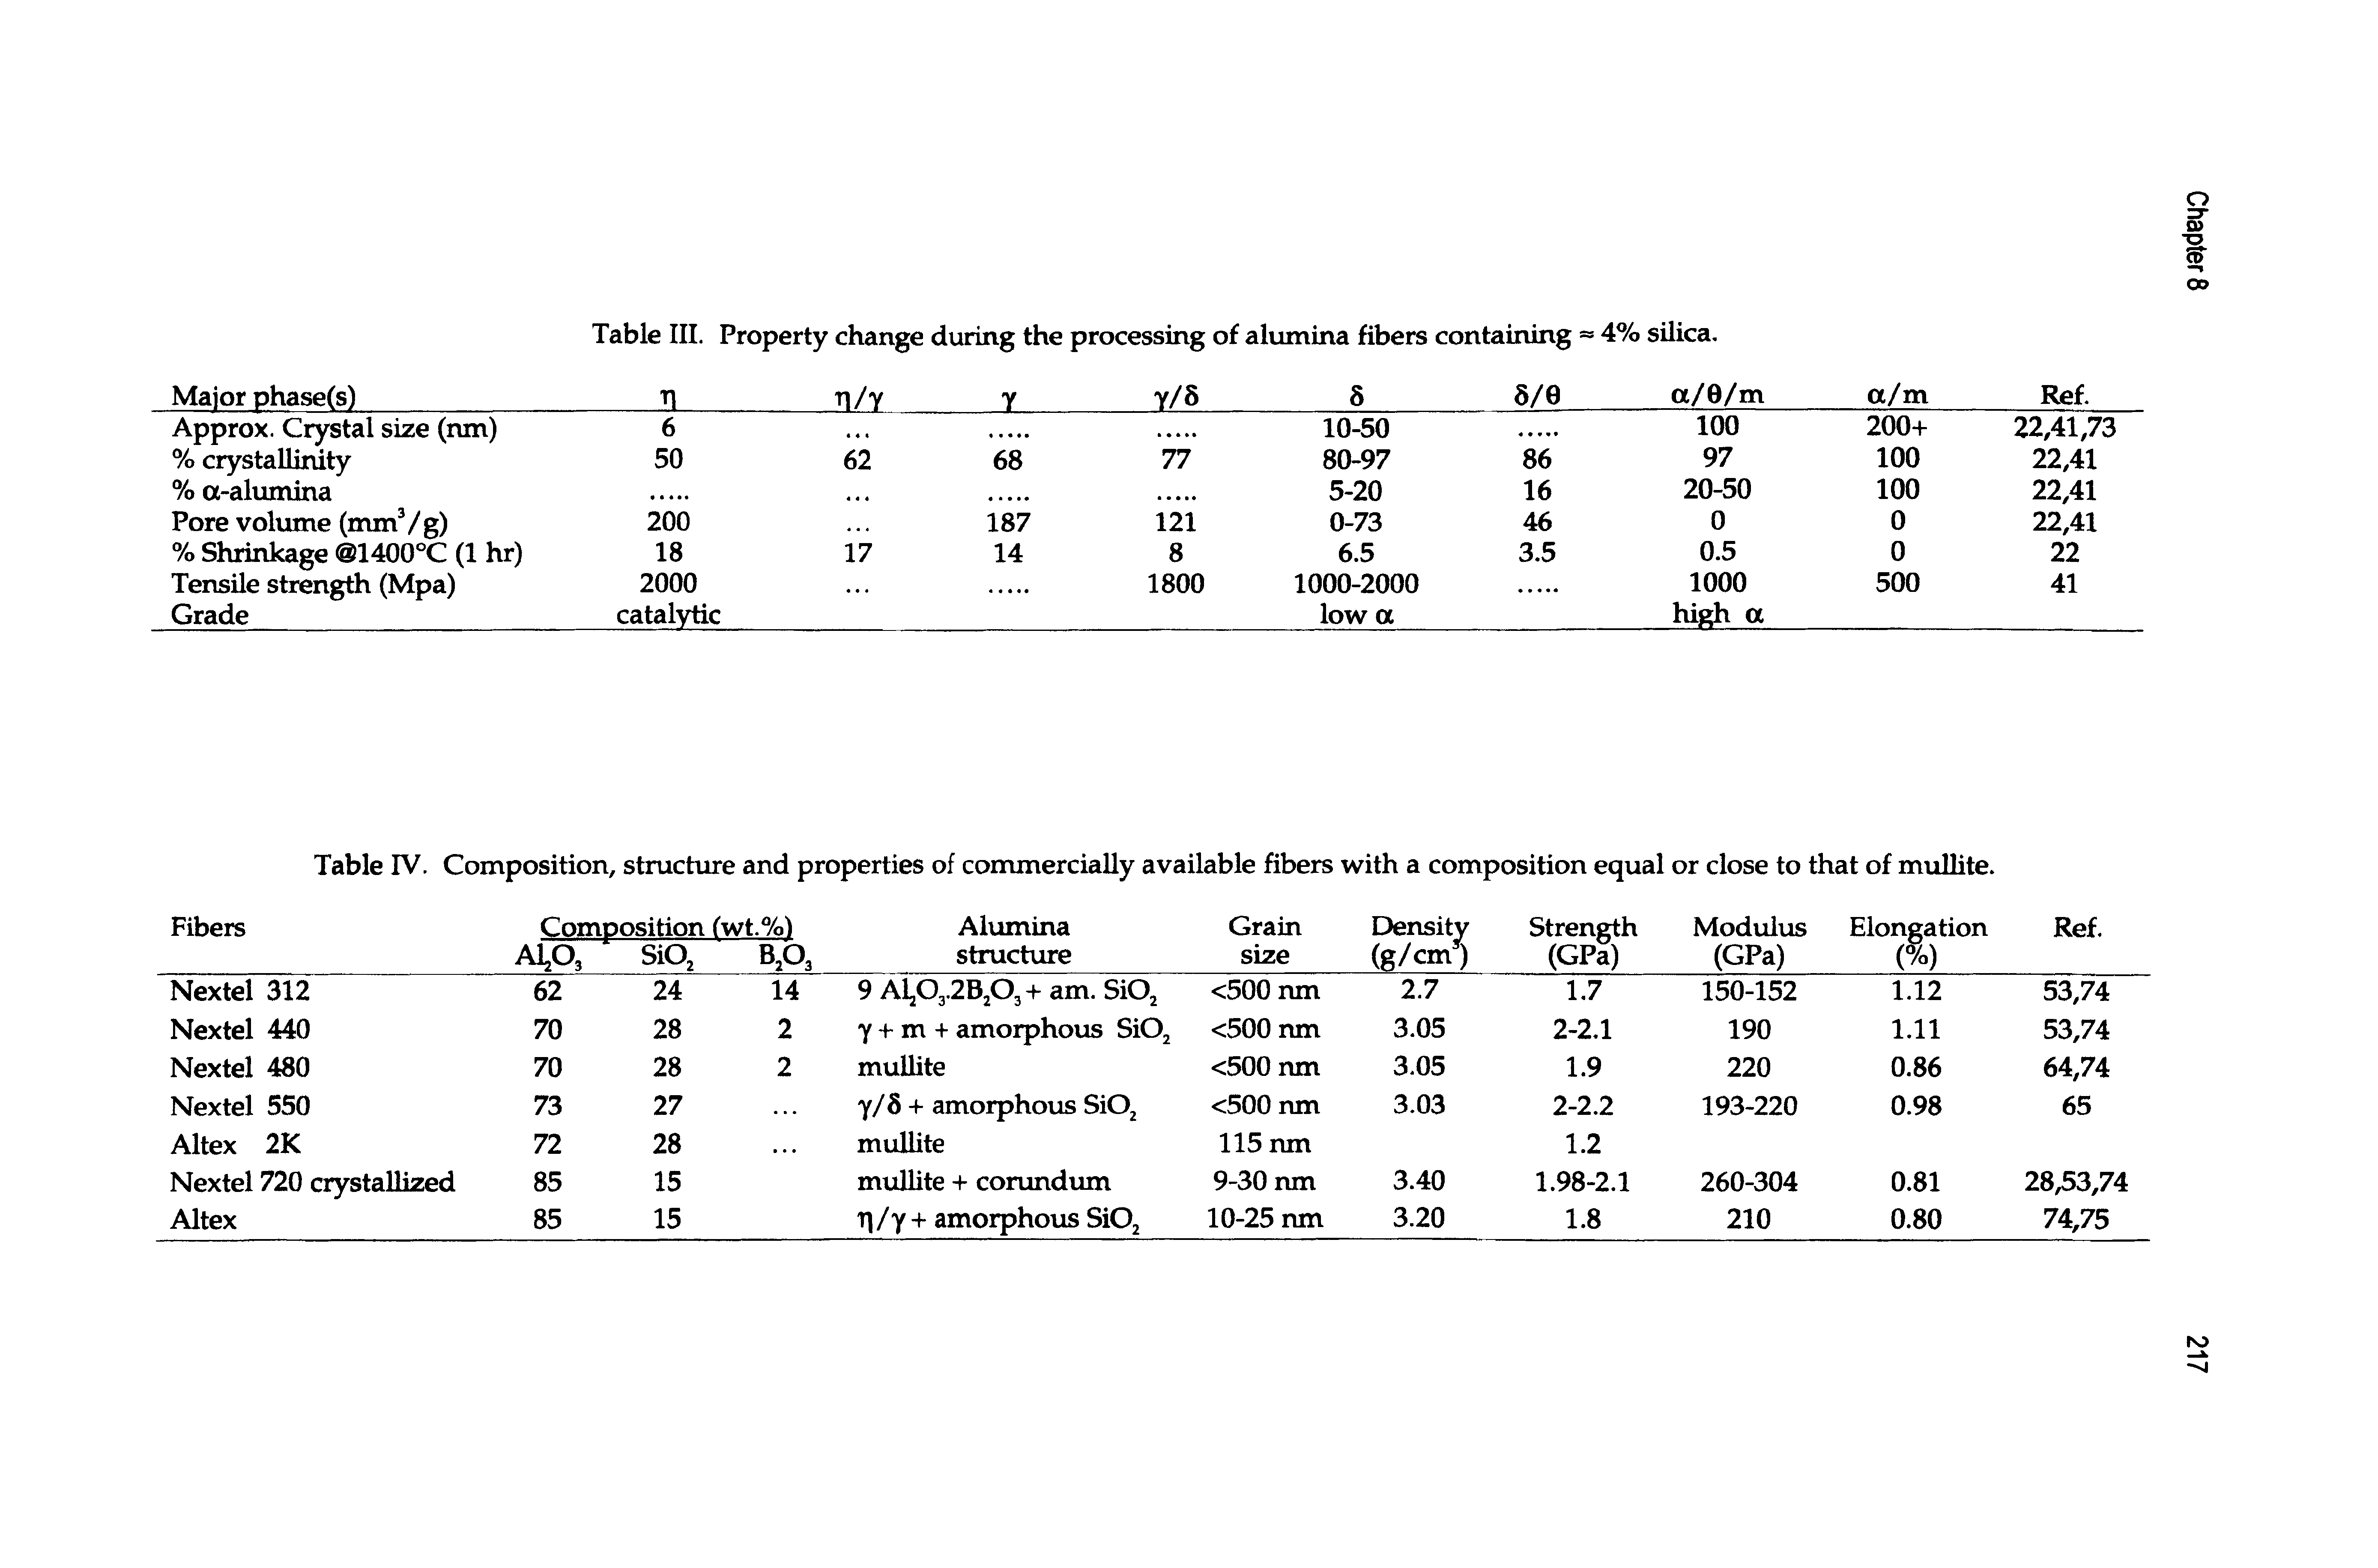 Table III. Property change during the processing of alumina fibers containing 4% silica.